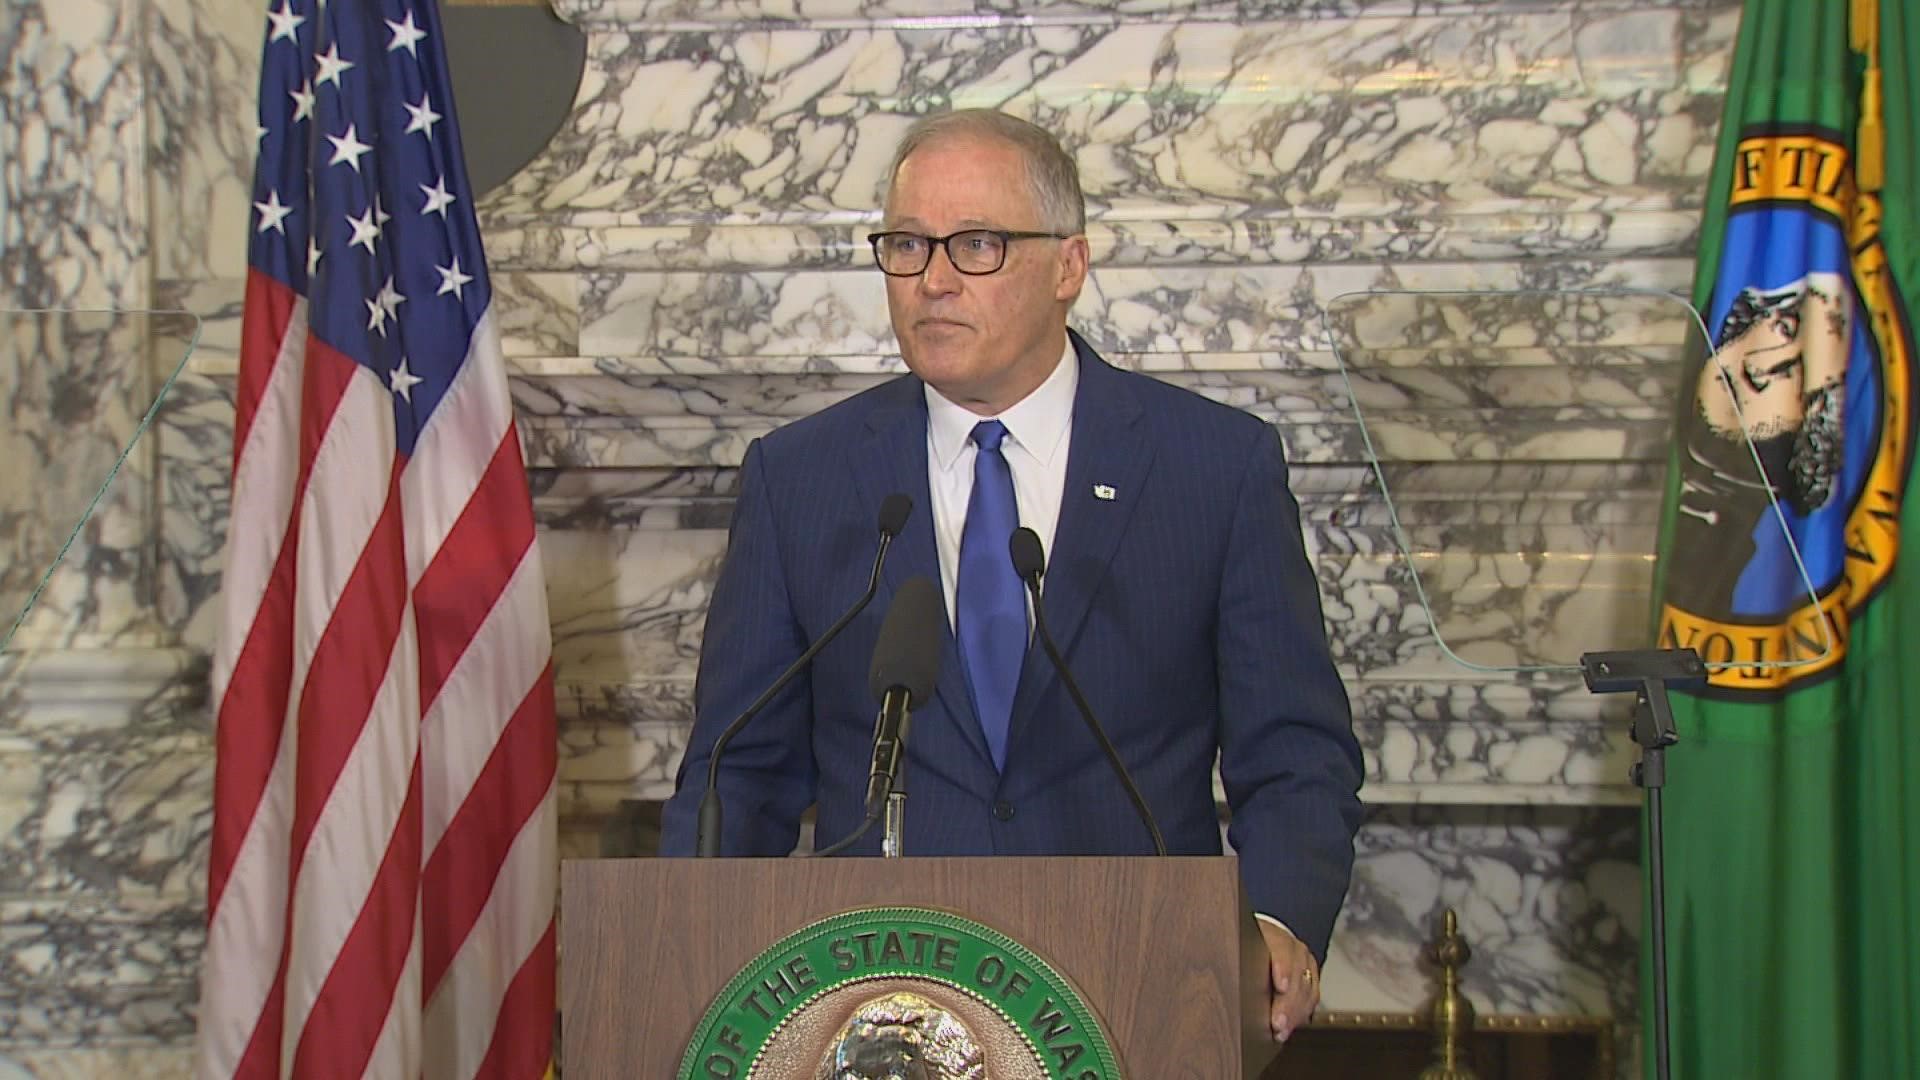 Gov. Jay Inslee highlighted his key legislative goals including homelessness, climate change and transportation in his annual State of the State address.